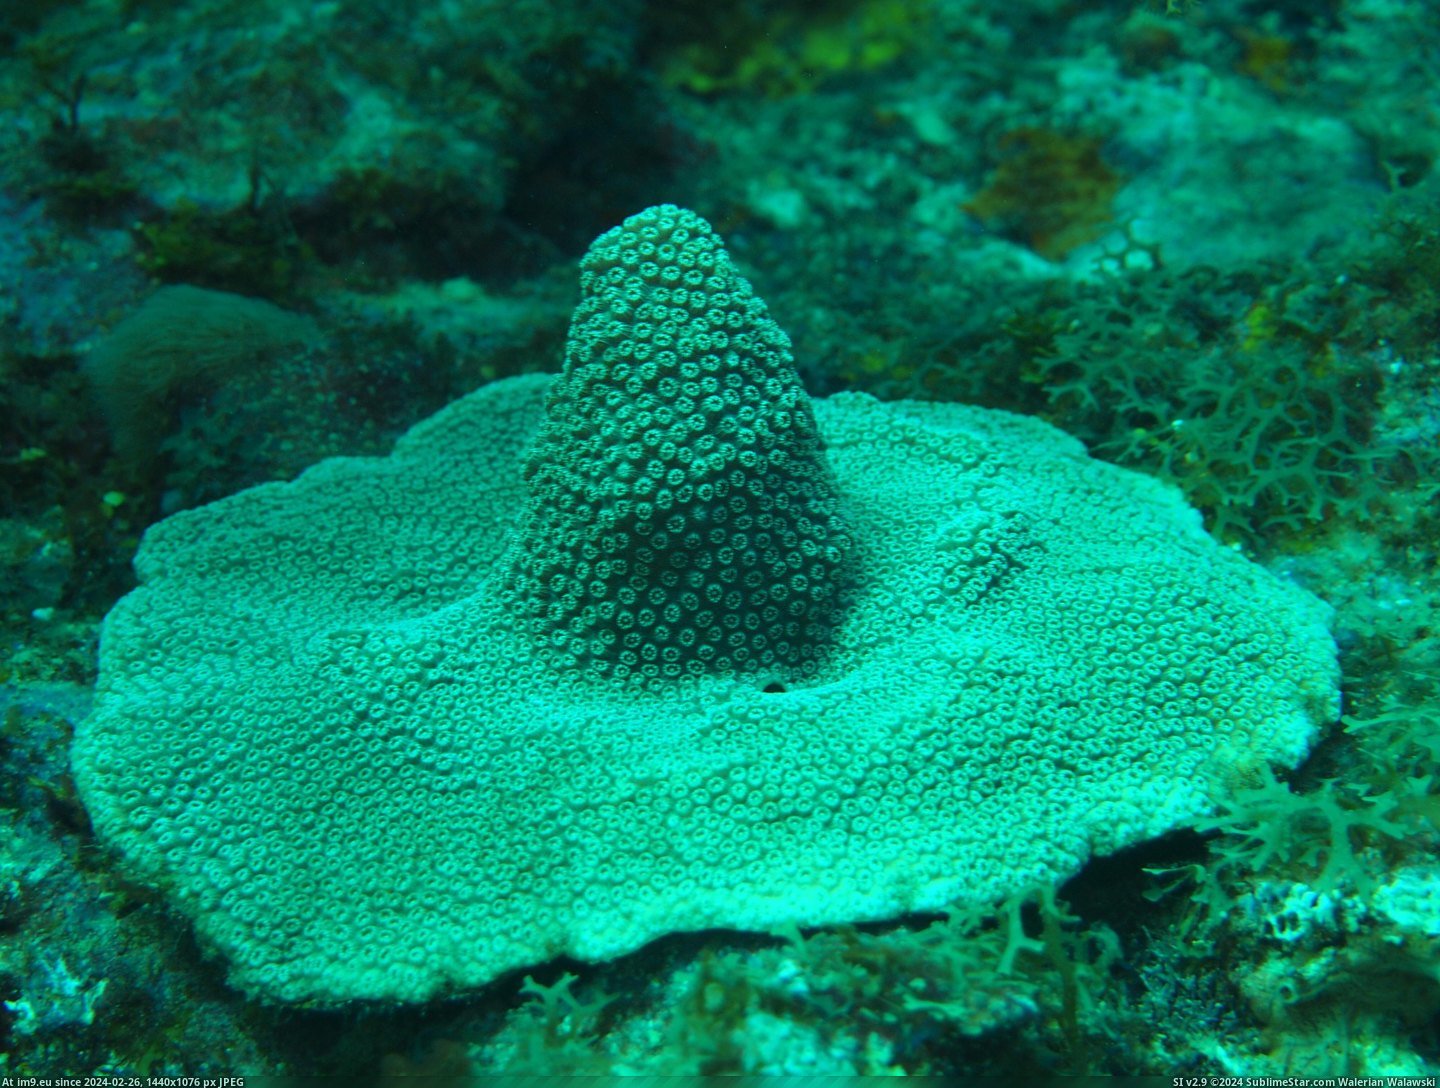 #Star #Saw #Coral #Scuba #Diving #Hat #Witch [Mildlyinteresting] This star coral I saw while SCUBA diving looks like a witch's hat. Pic. (Image of album My r/MILDLYINTERESTING favs))